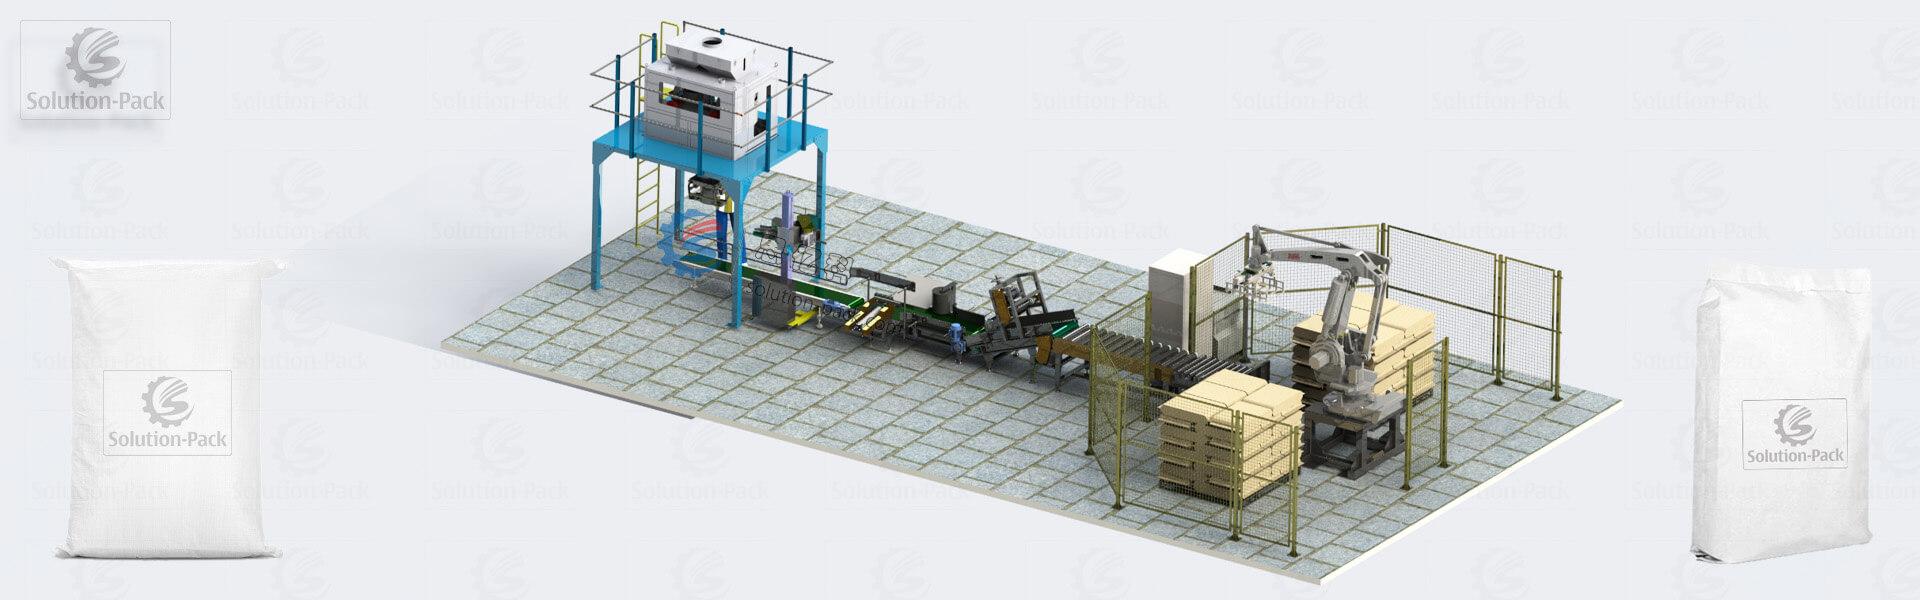 Solution-Pack | HZ50B Double Hopper Manual Bagging Machine Heading Banner Picture | Semi-Automatic Bagging Palletizing Line | Manual Bagging Stitching Machine Line | Industrial Bagging System